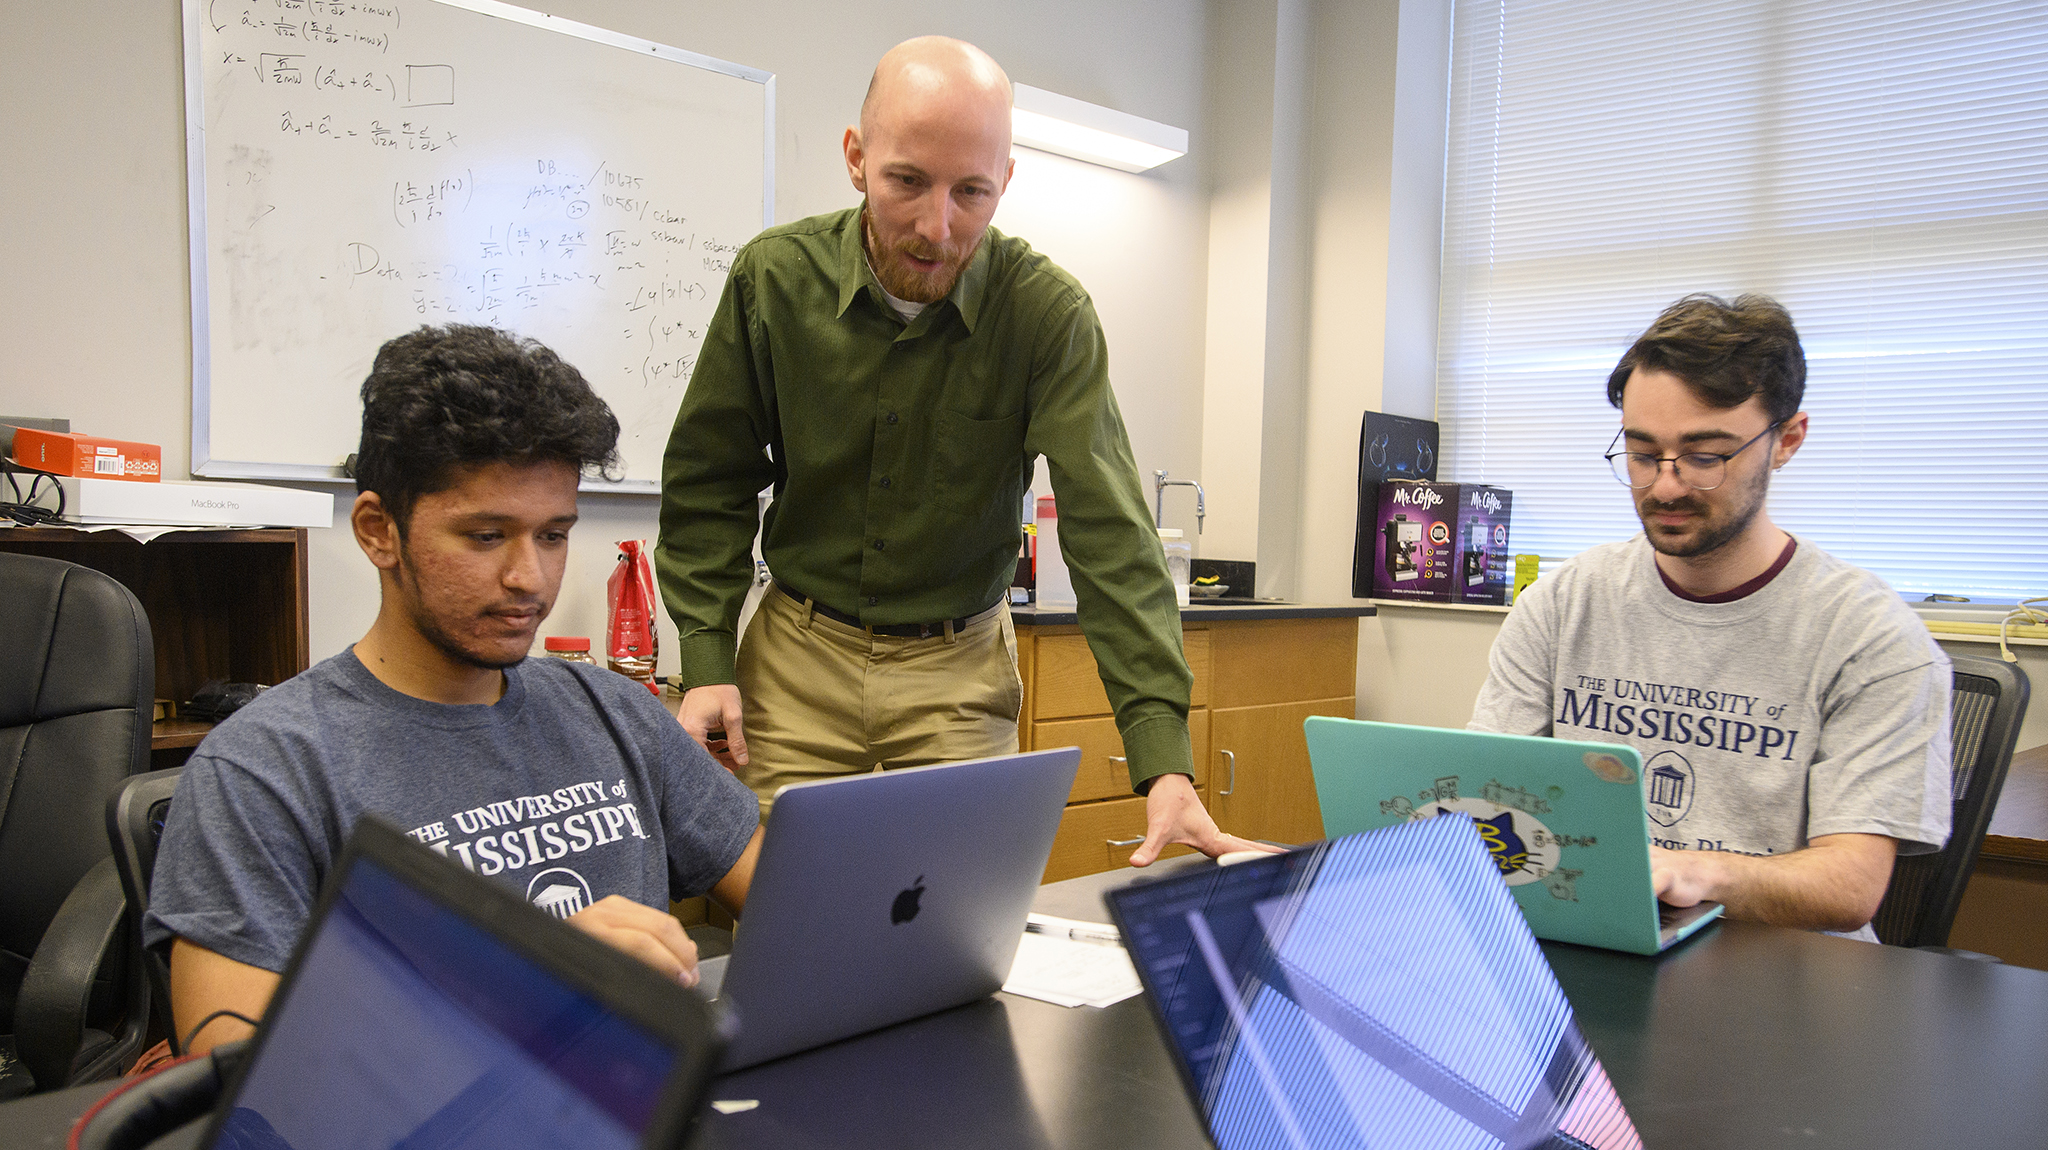 Jake Bennett (center), an assistant professor in the Department of Physics and Astronomy, reviews data with undergraduate physics majors Sakul Mahat (left) and Paul Gebeline. Bennett is part of an international group studying subatomic particles called charmed baryons, and their latest results have been published in the journal Physical Review Letters. Photo by Thomas Graning/Ole Miss Digital Imaging Services